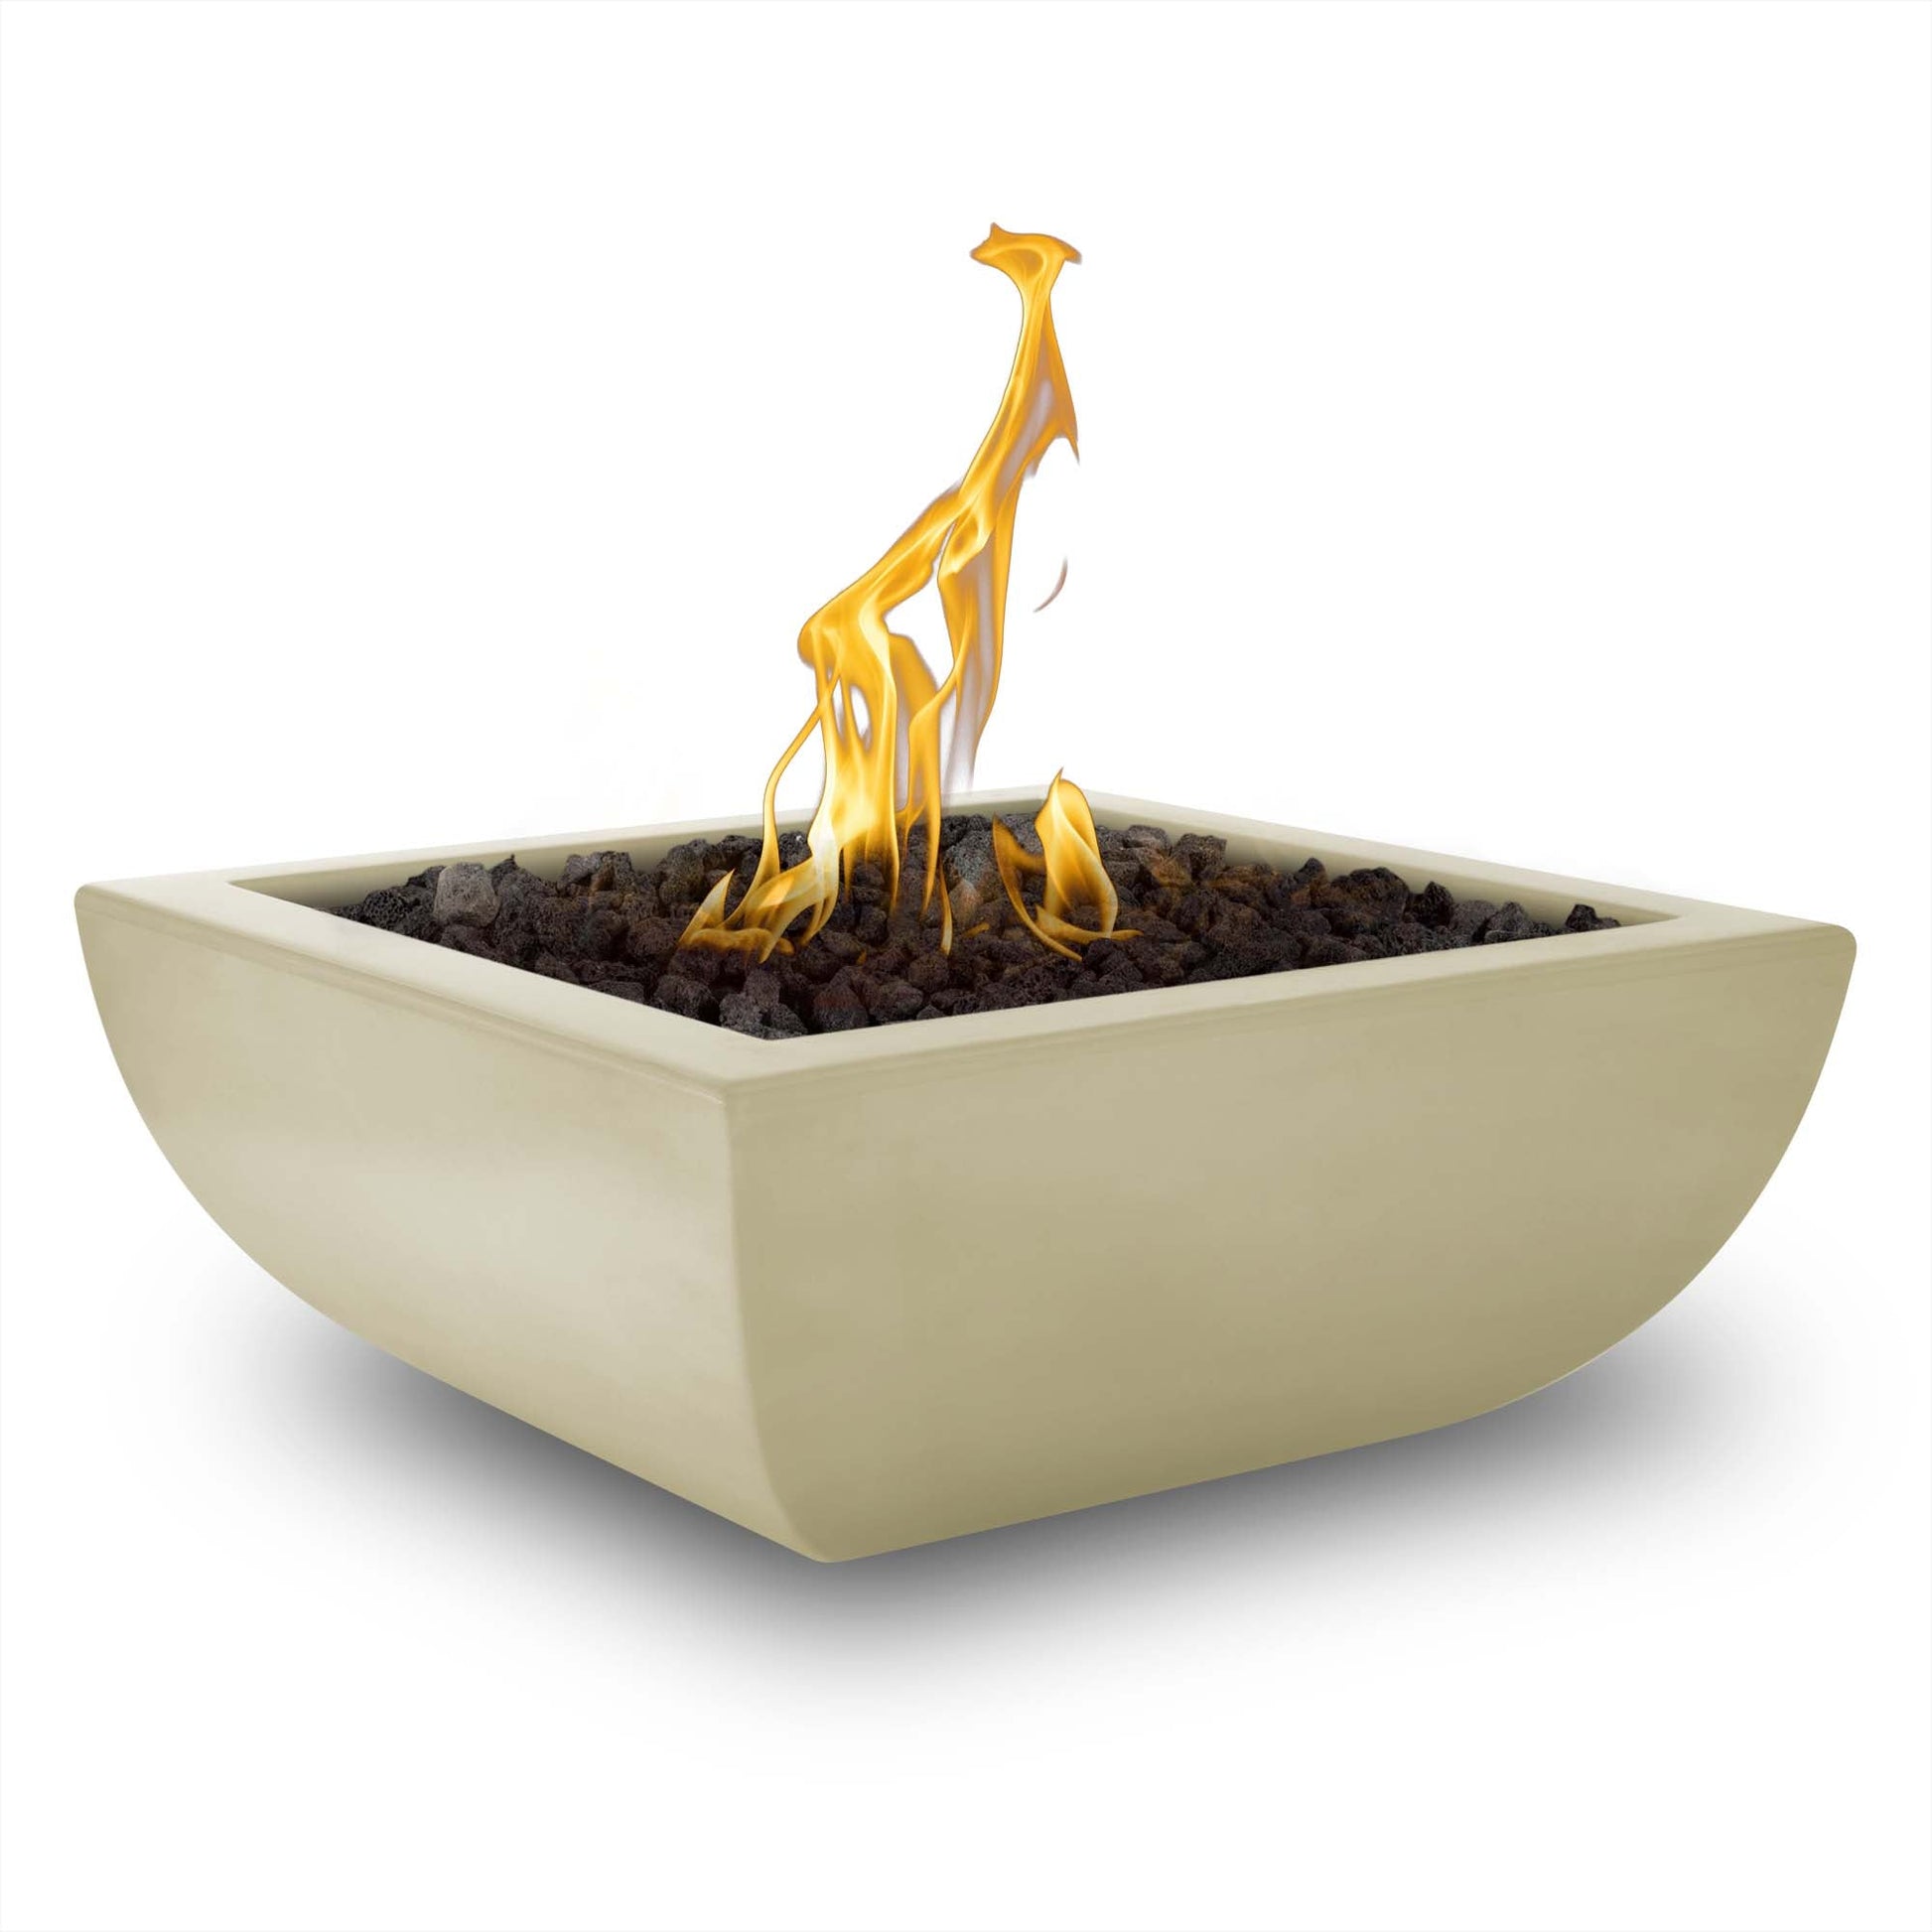 The Outdoor Plus Square Avalon 36" Rustic Gray GFRC Concrete Natural Gas Fire Bowl with Match Lit with Flame Sense Ignition